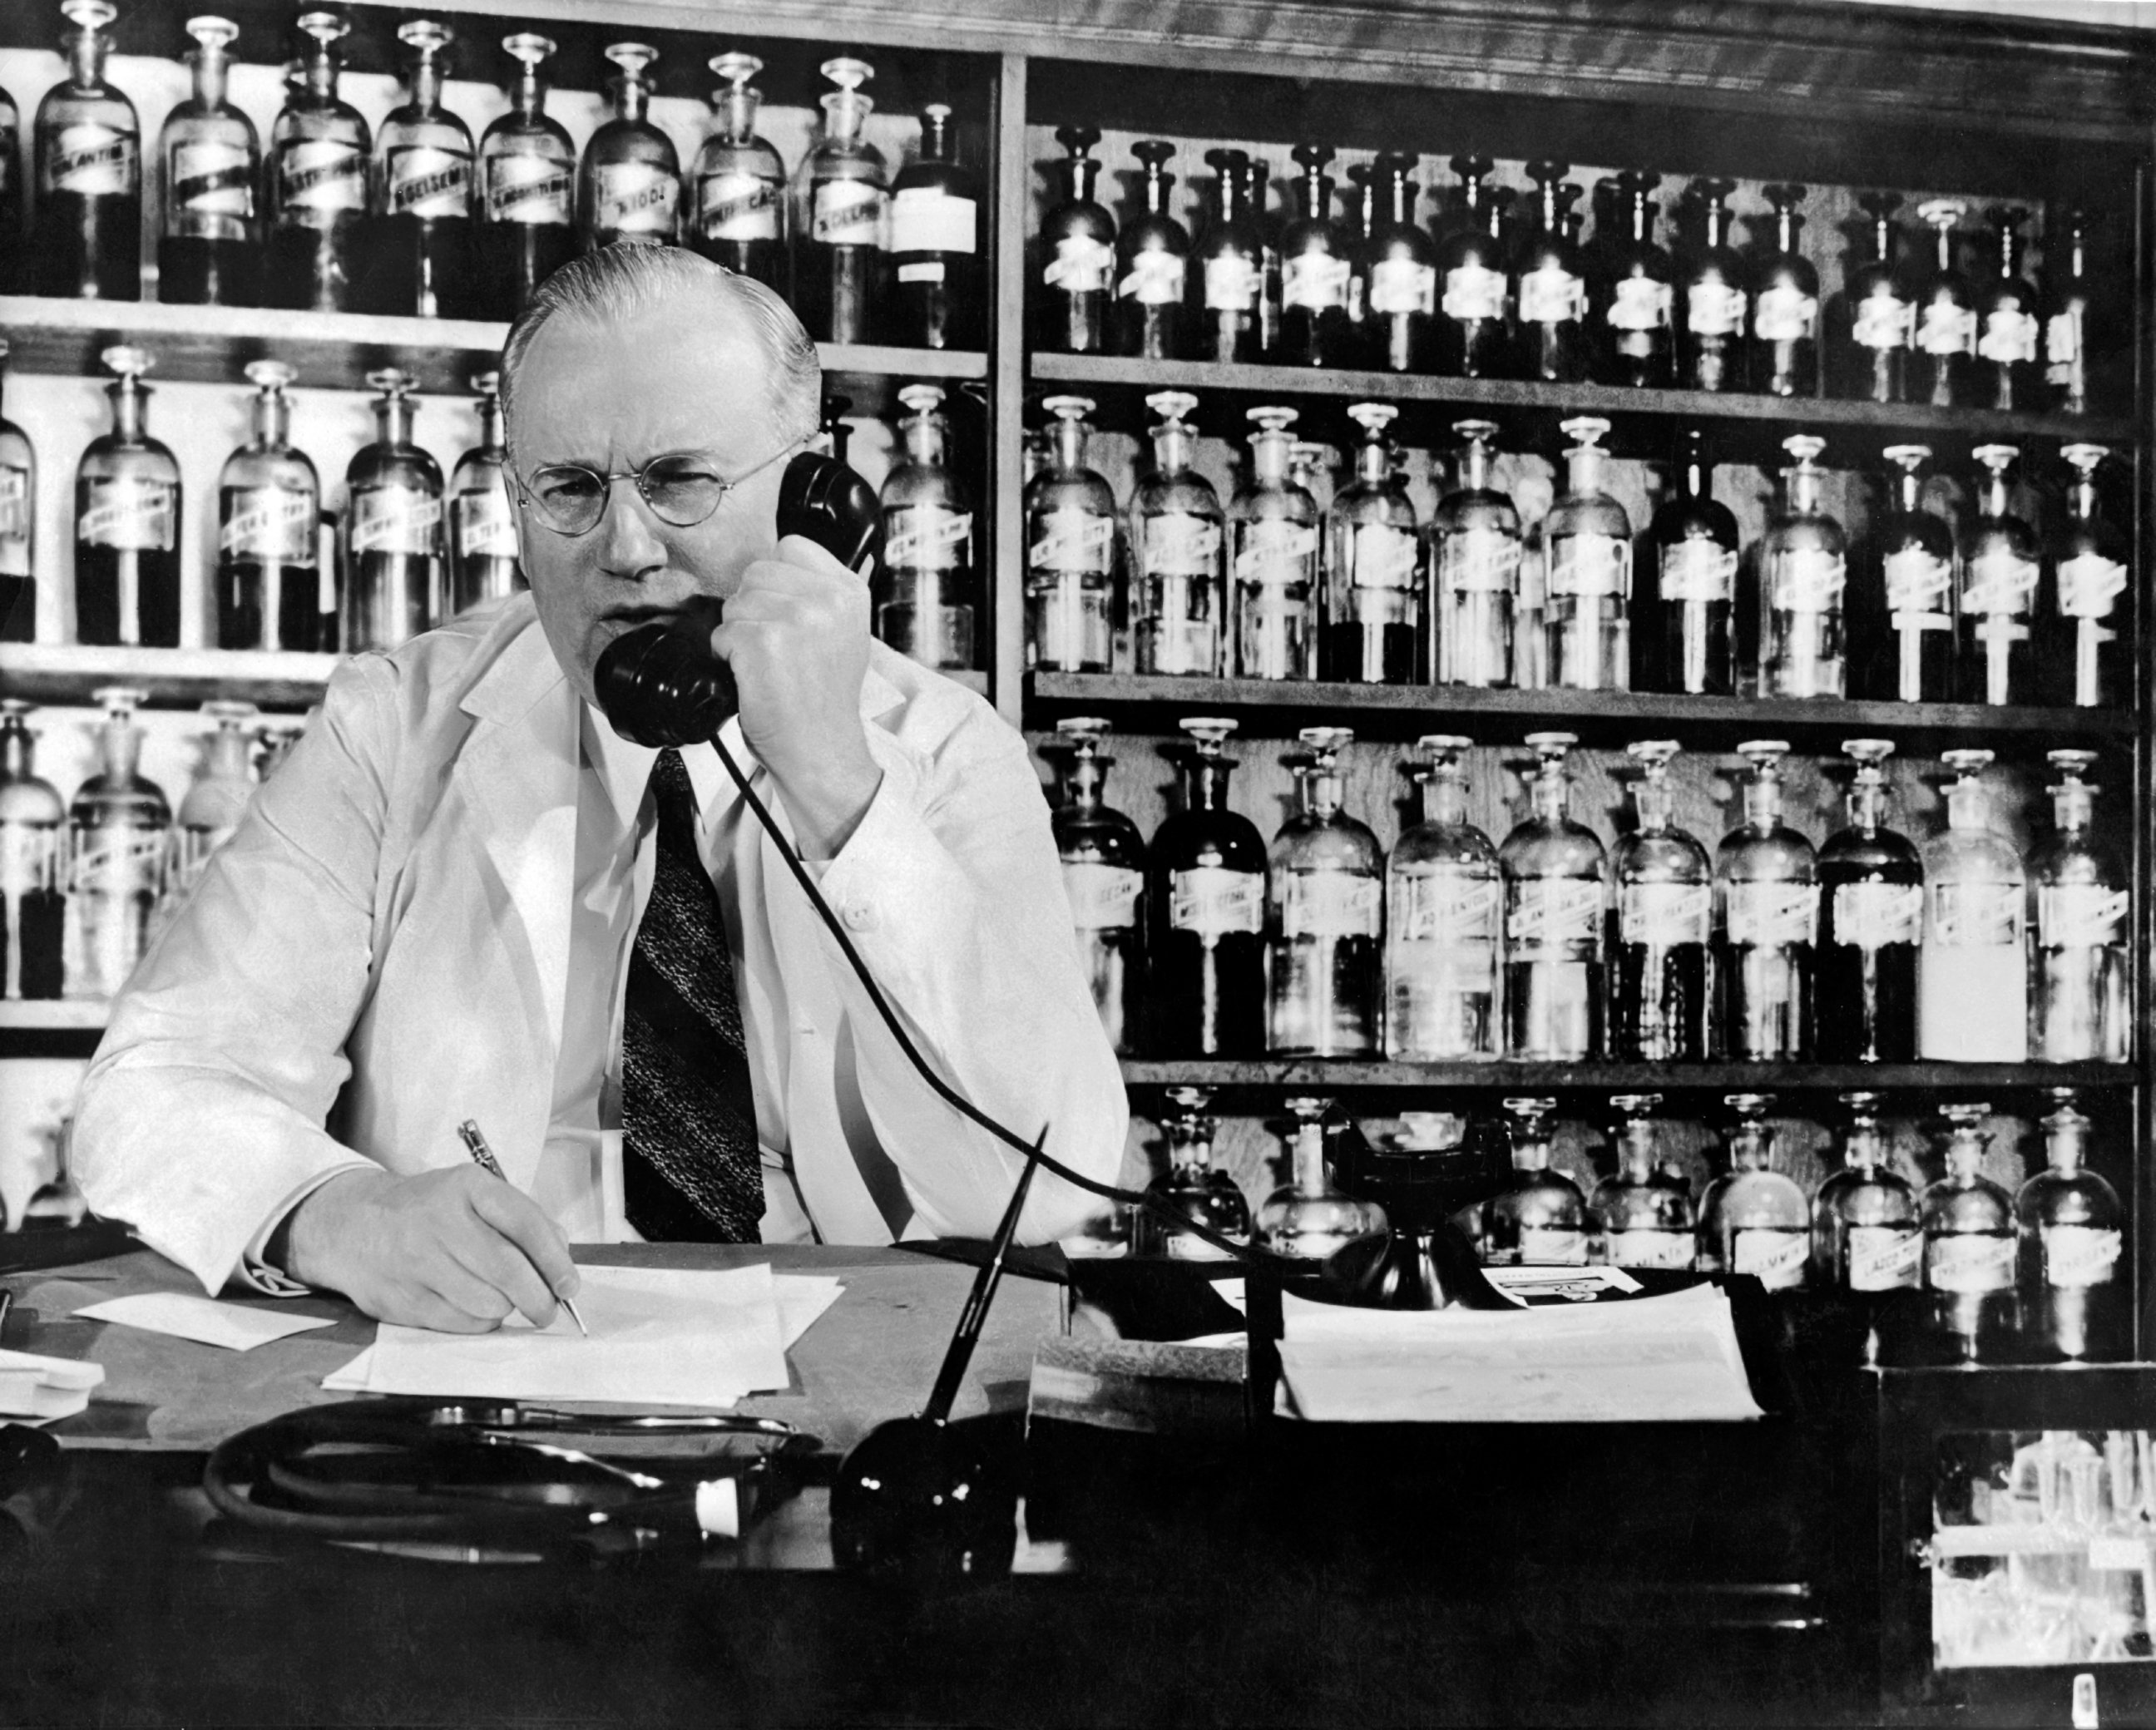 PHOTO: A pharmacist is seen on the telephone inside a drug store in this 1940 file photo.